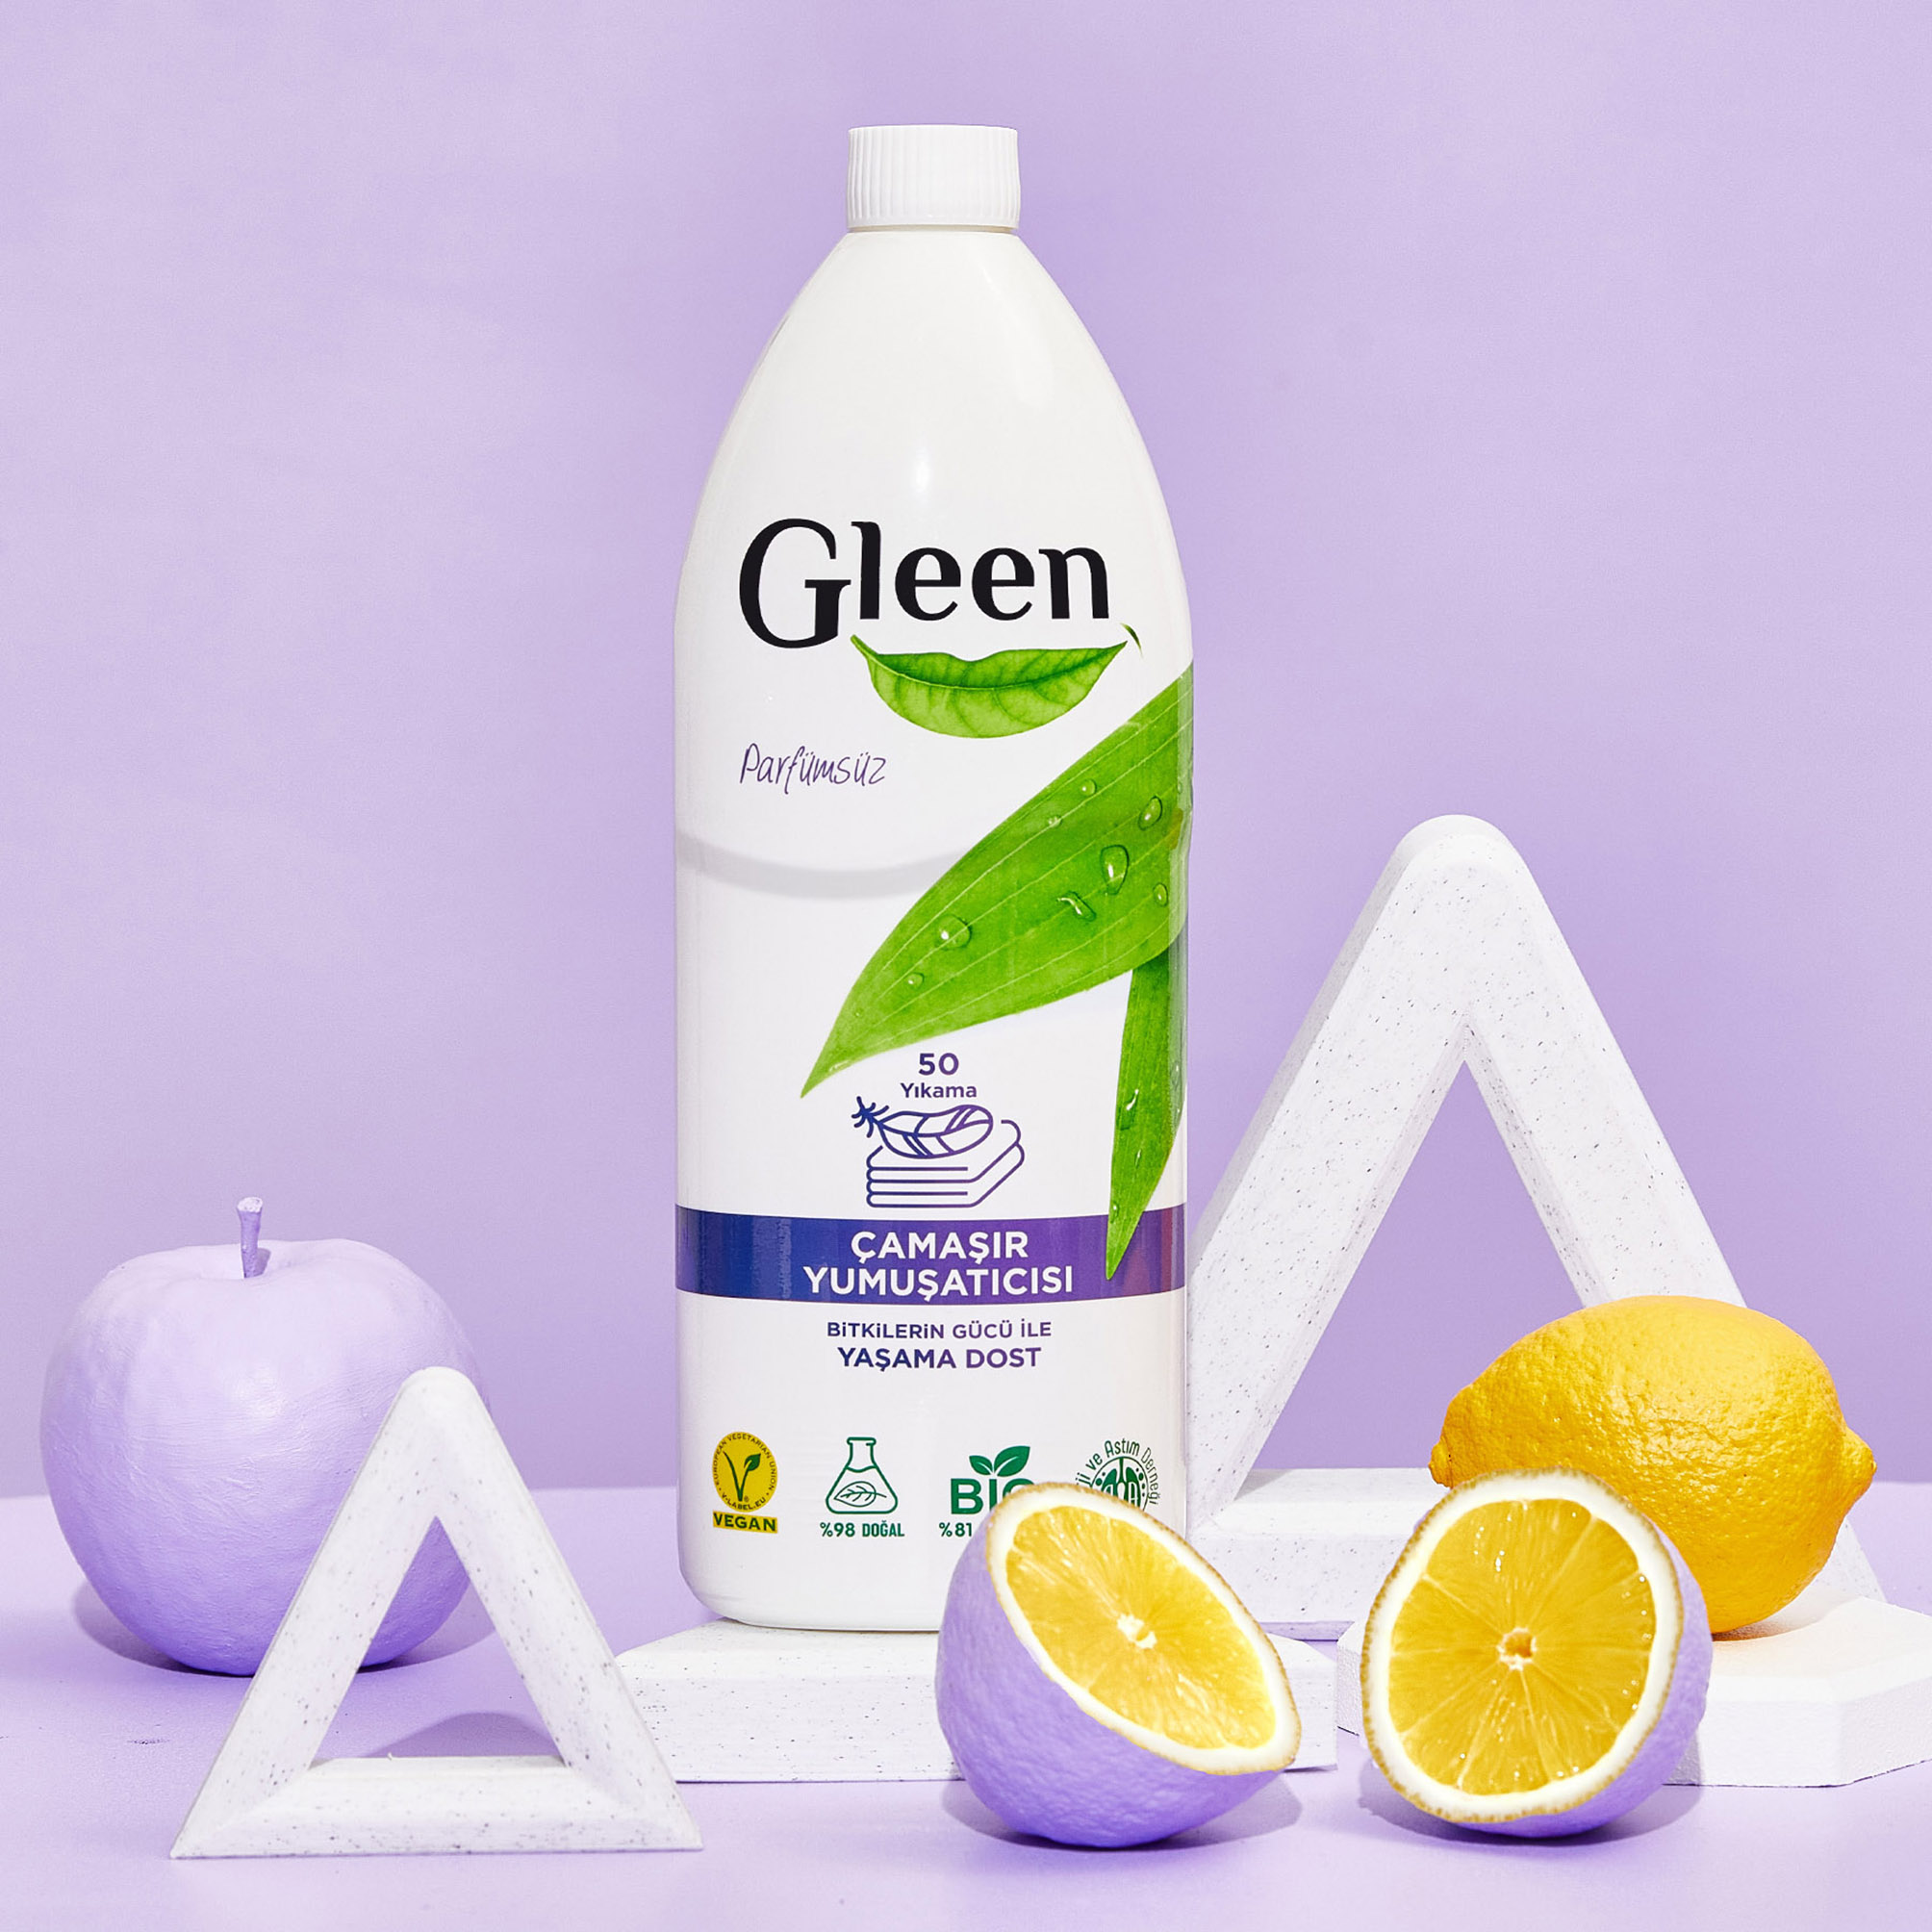 Gleen Packaging by Tasarist Makes “Nature Smile”